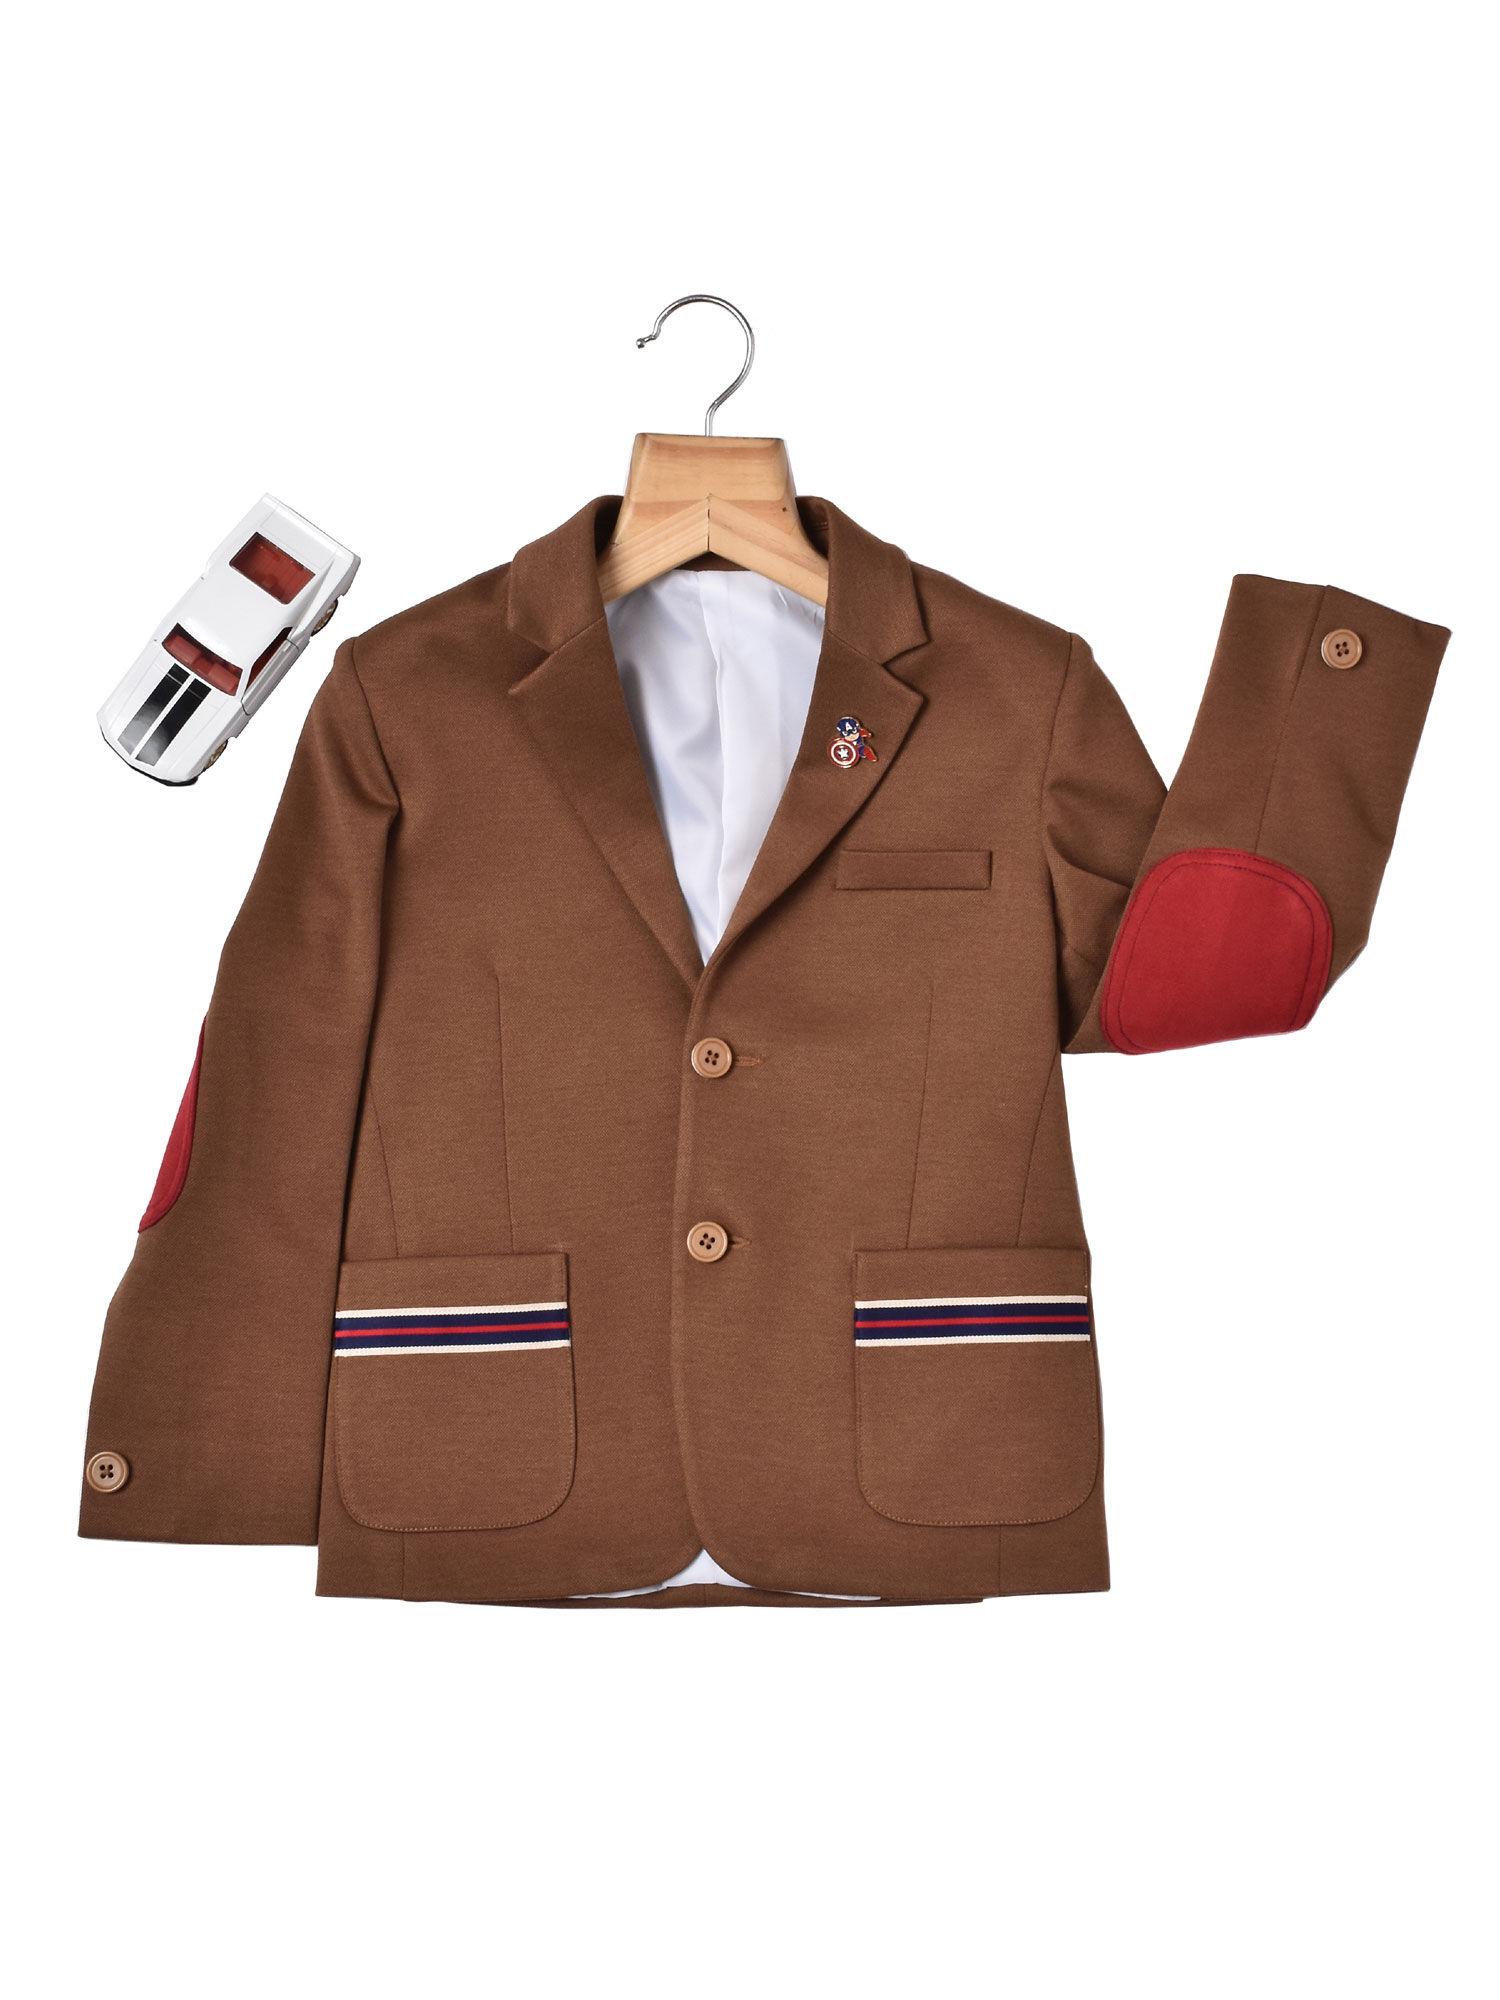 bronze-blazer-with-detailing-on-pockets-and-maroon-elbow-patch